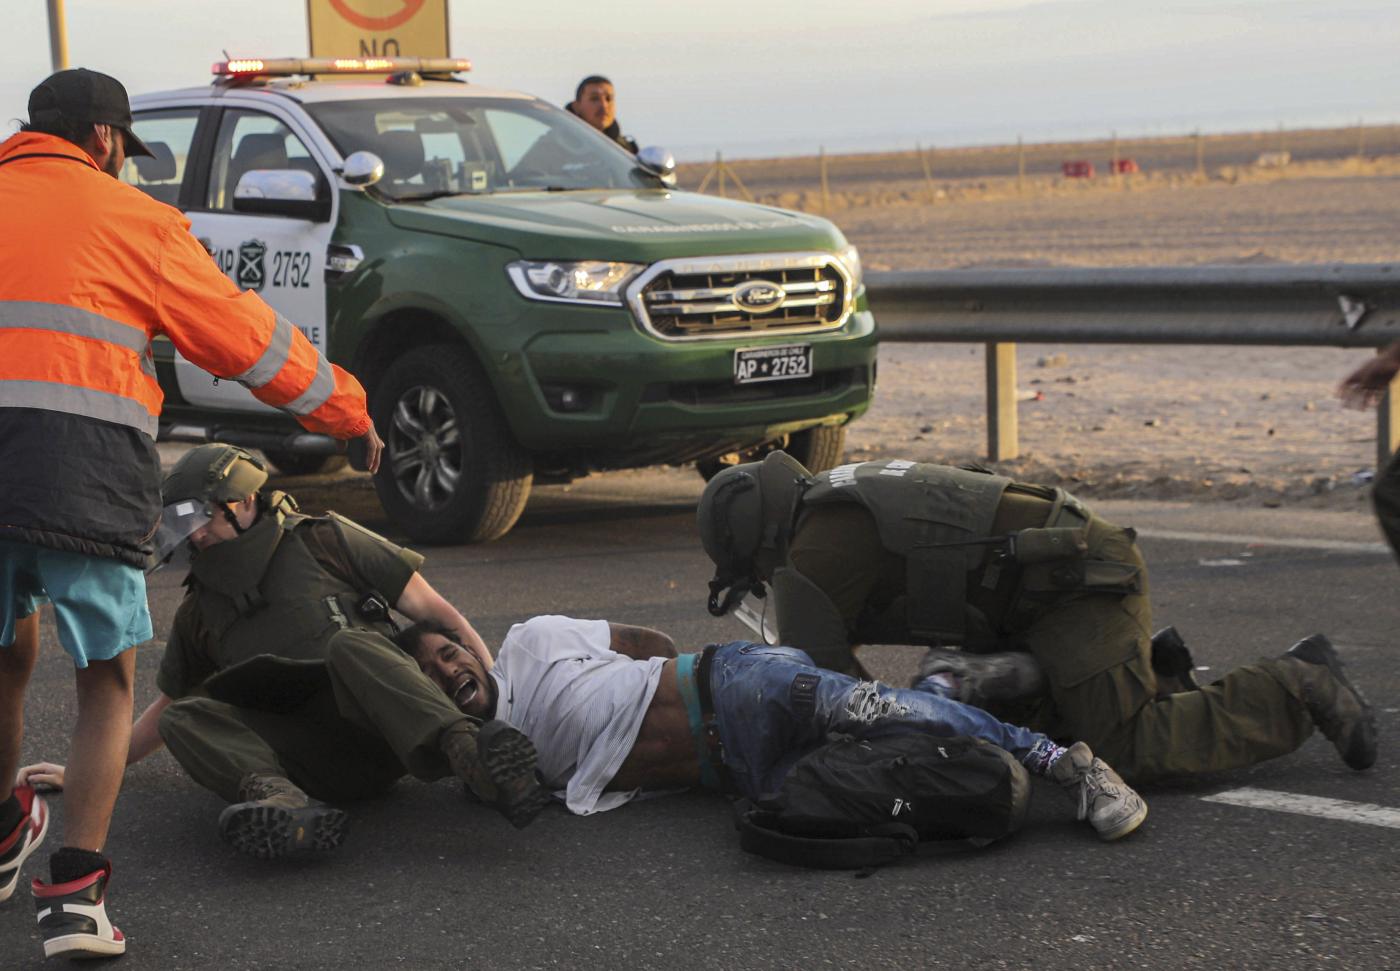 A migrant is detained by Chilean Police as he blocked the highway on the Chile-Peru border, near Arica, Chile, Tuesday, May 2, 2023. A migration crisis at the border between Chile and Peru has intensified as migrants who claim the want to go home remained stranded, unable to enter Peru. (AP Photo/Agustin Mercado)

Associated Press/LaPresse
Only Italy and Spain